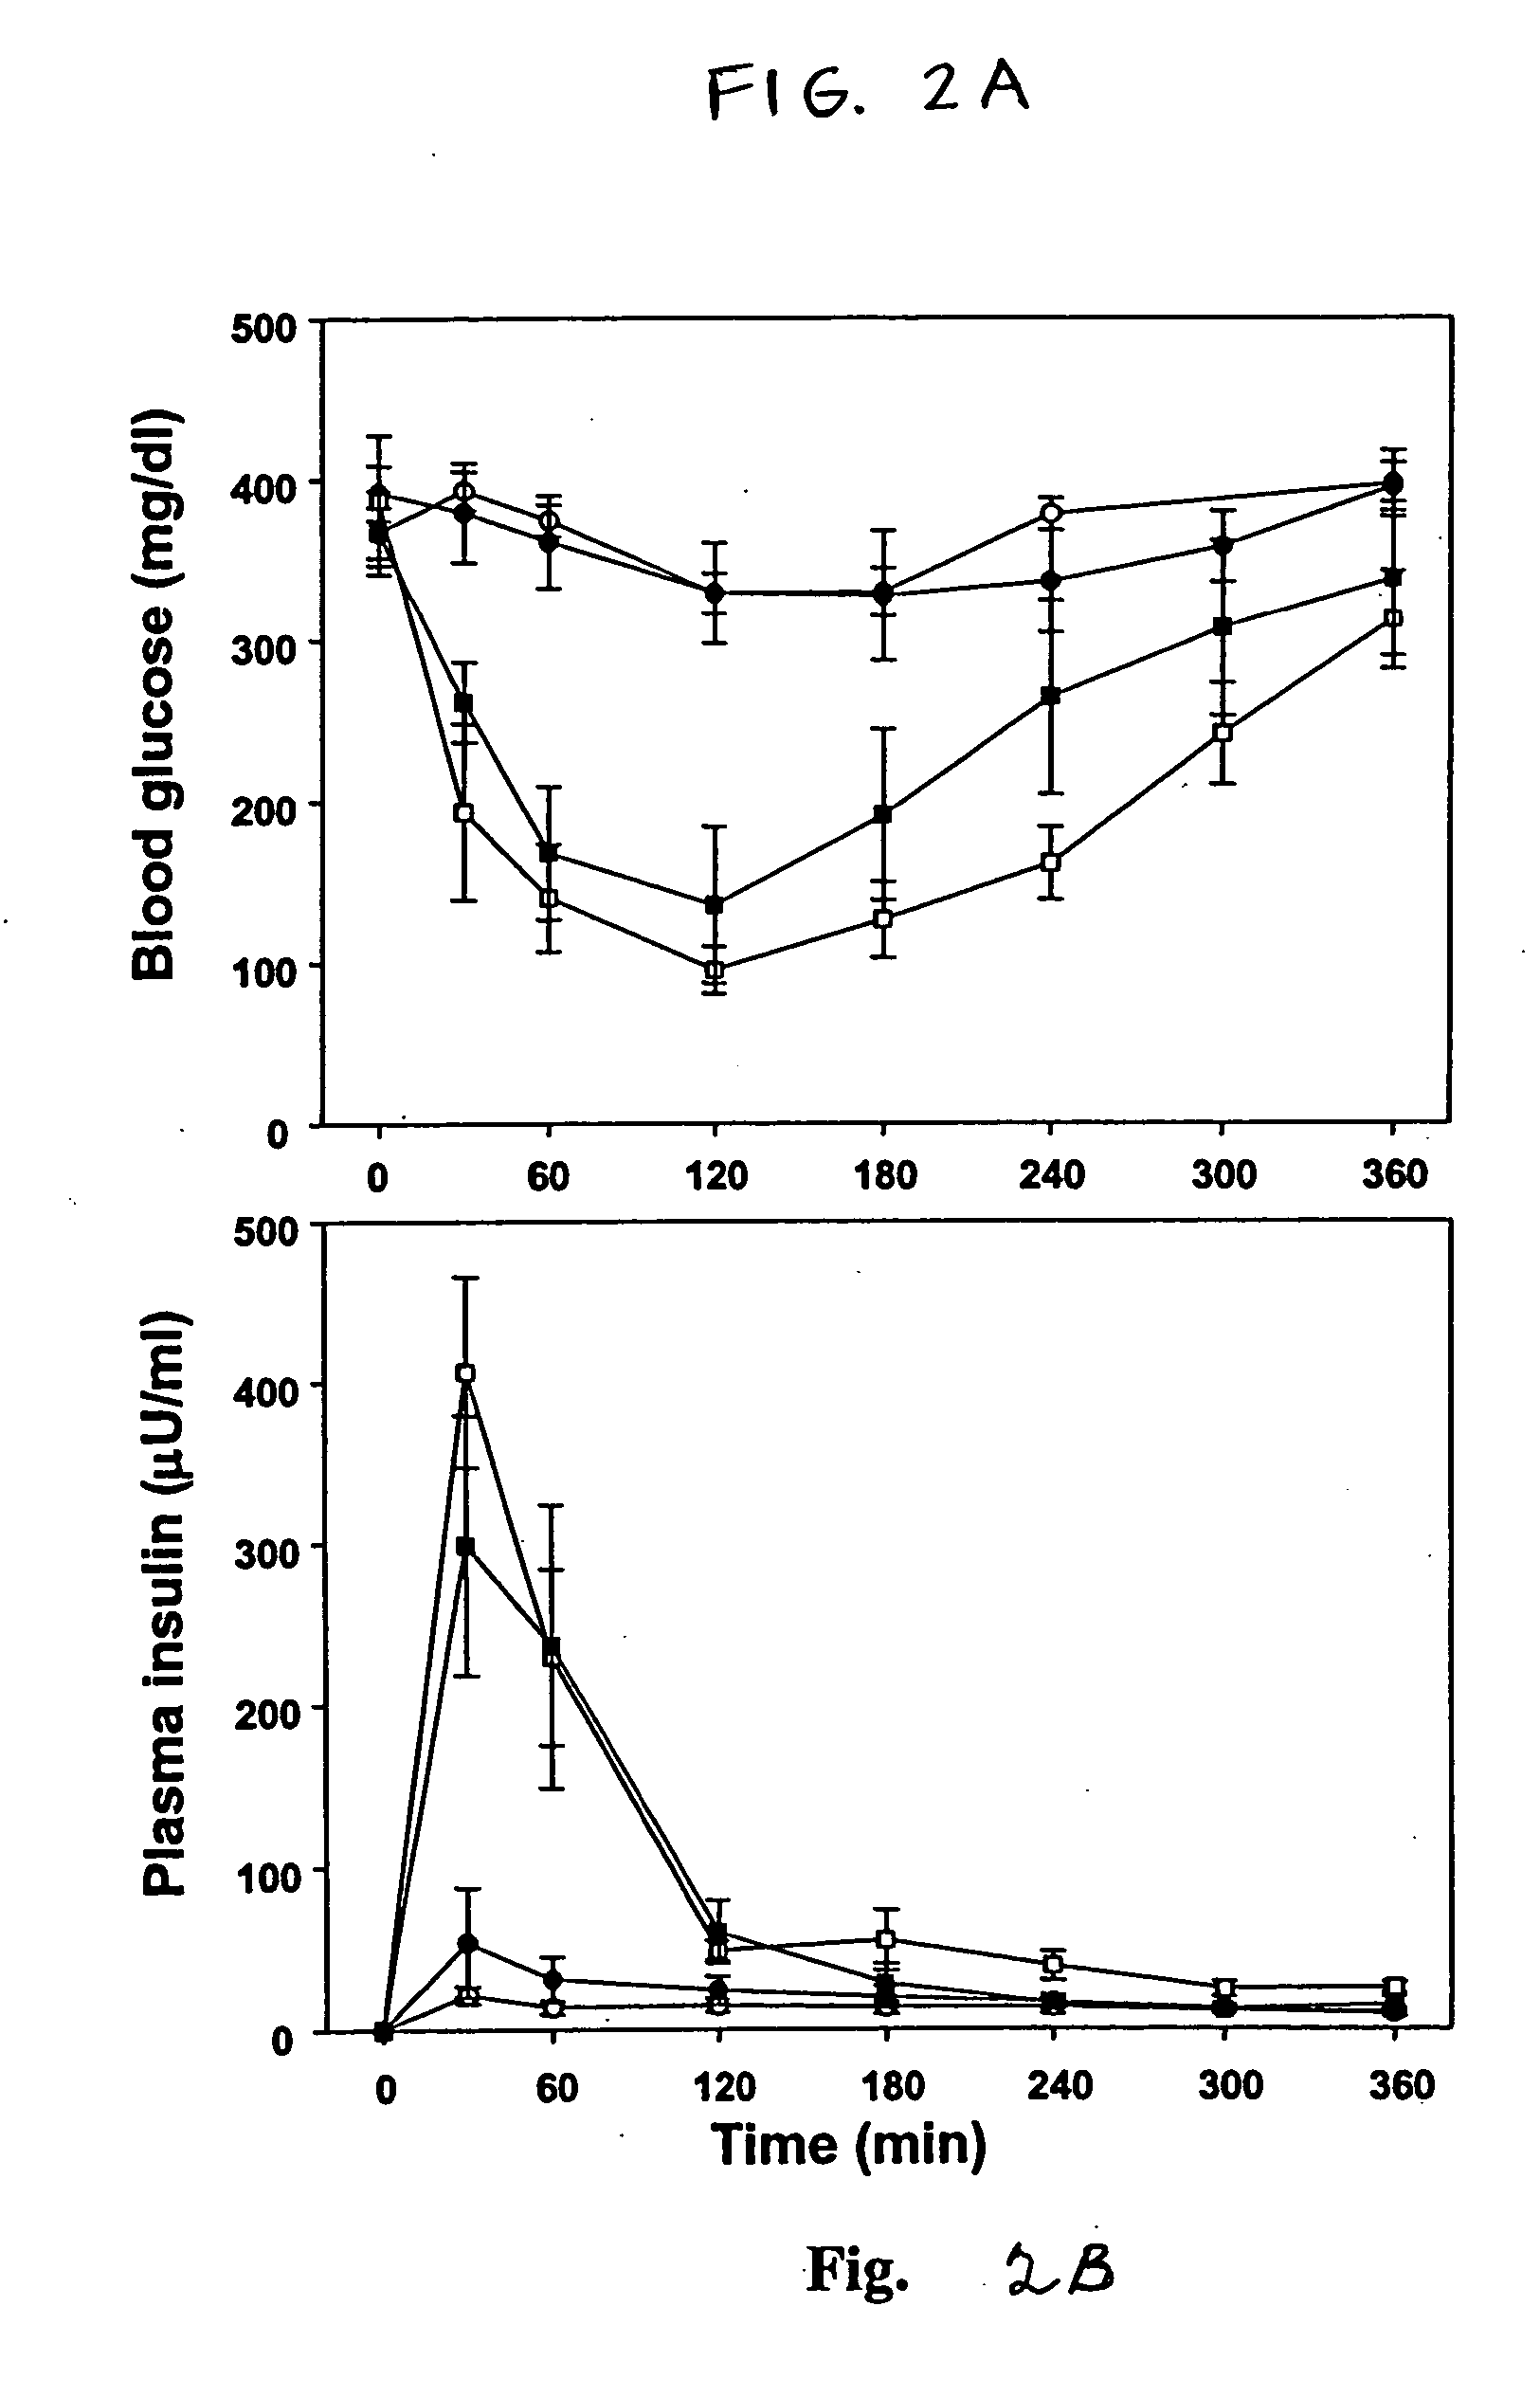 Delivery Agents for enhancing mucosal absorption of therapeutic agents